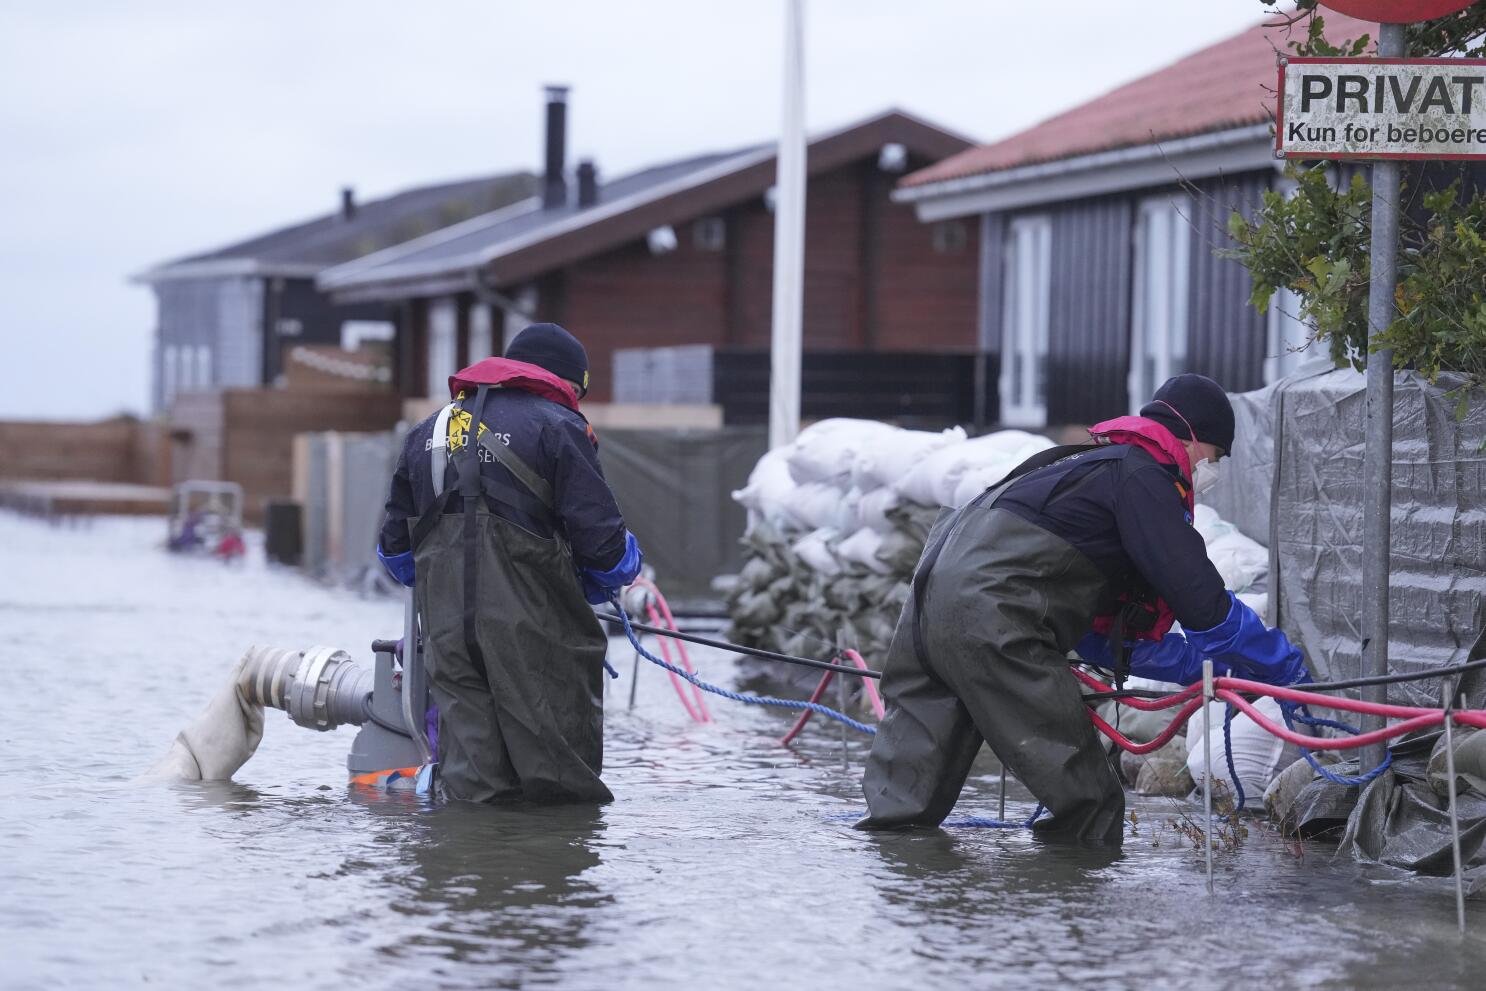 Gale-force winds and floods strike Northern Europe - Los Angeles Times